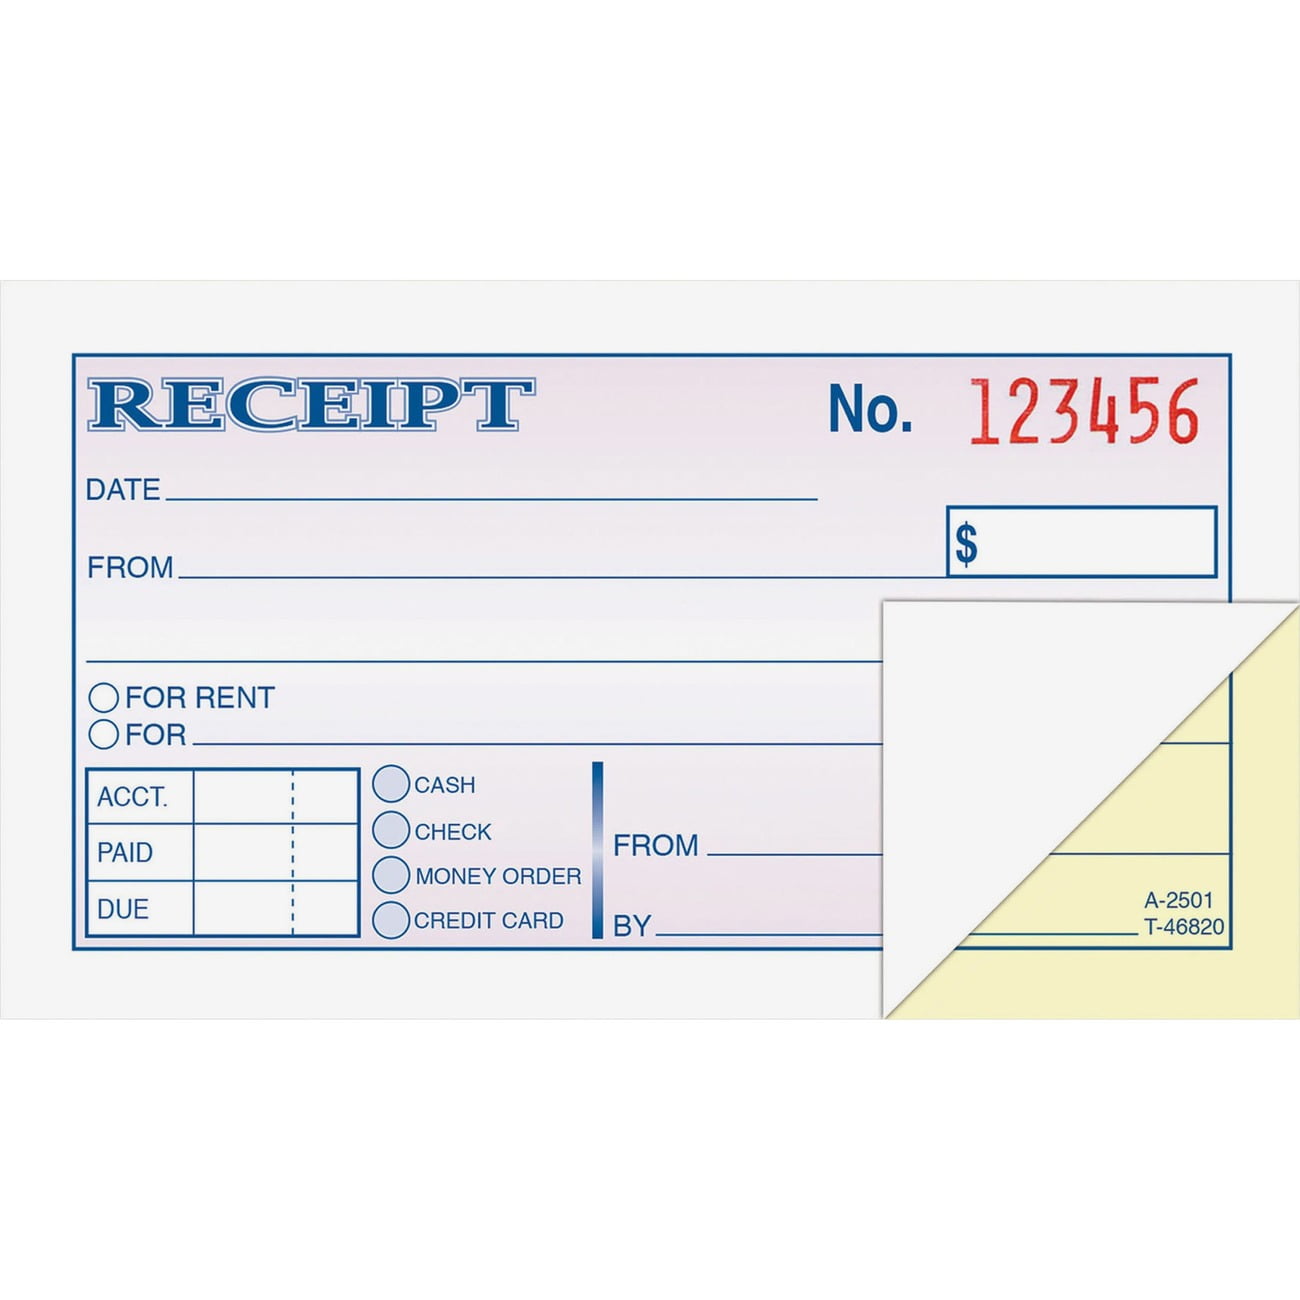 Blue Summit Supplies Triplicate Receipt Book 100 per Book 500 Total 5 Pack 3 Part Carbonless Payment Receipt Books for Money Rent or Cash with